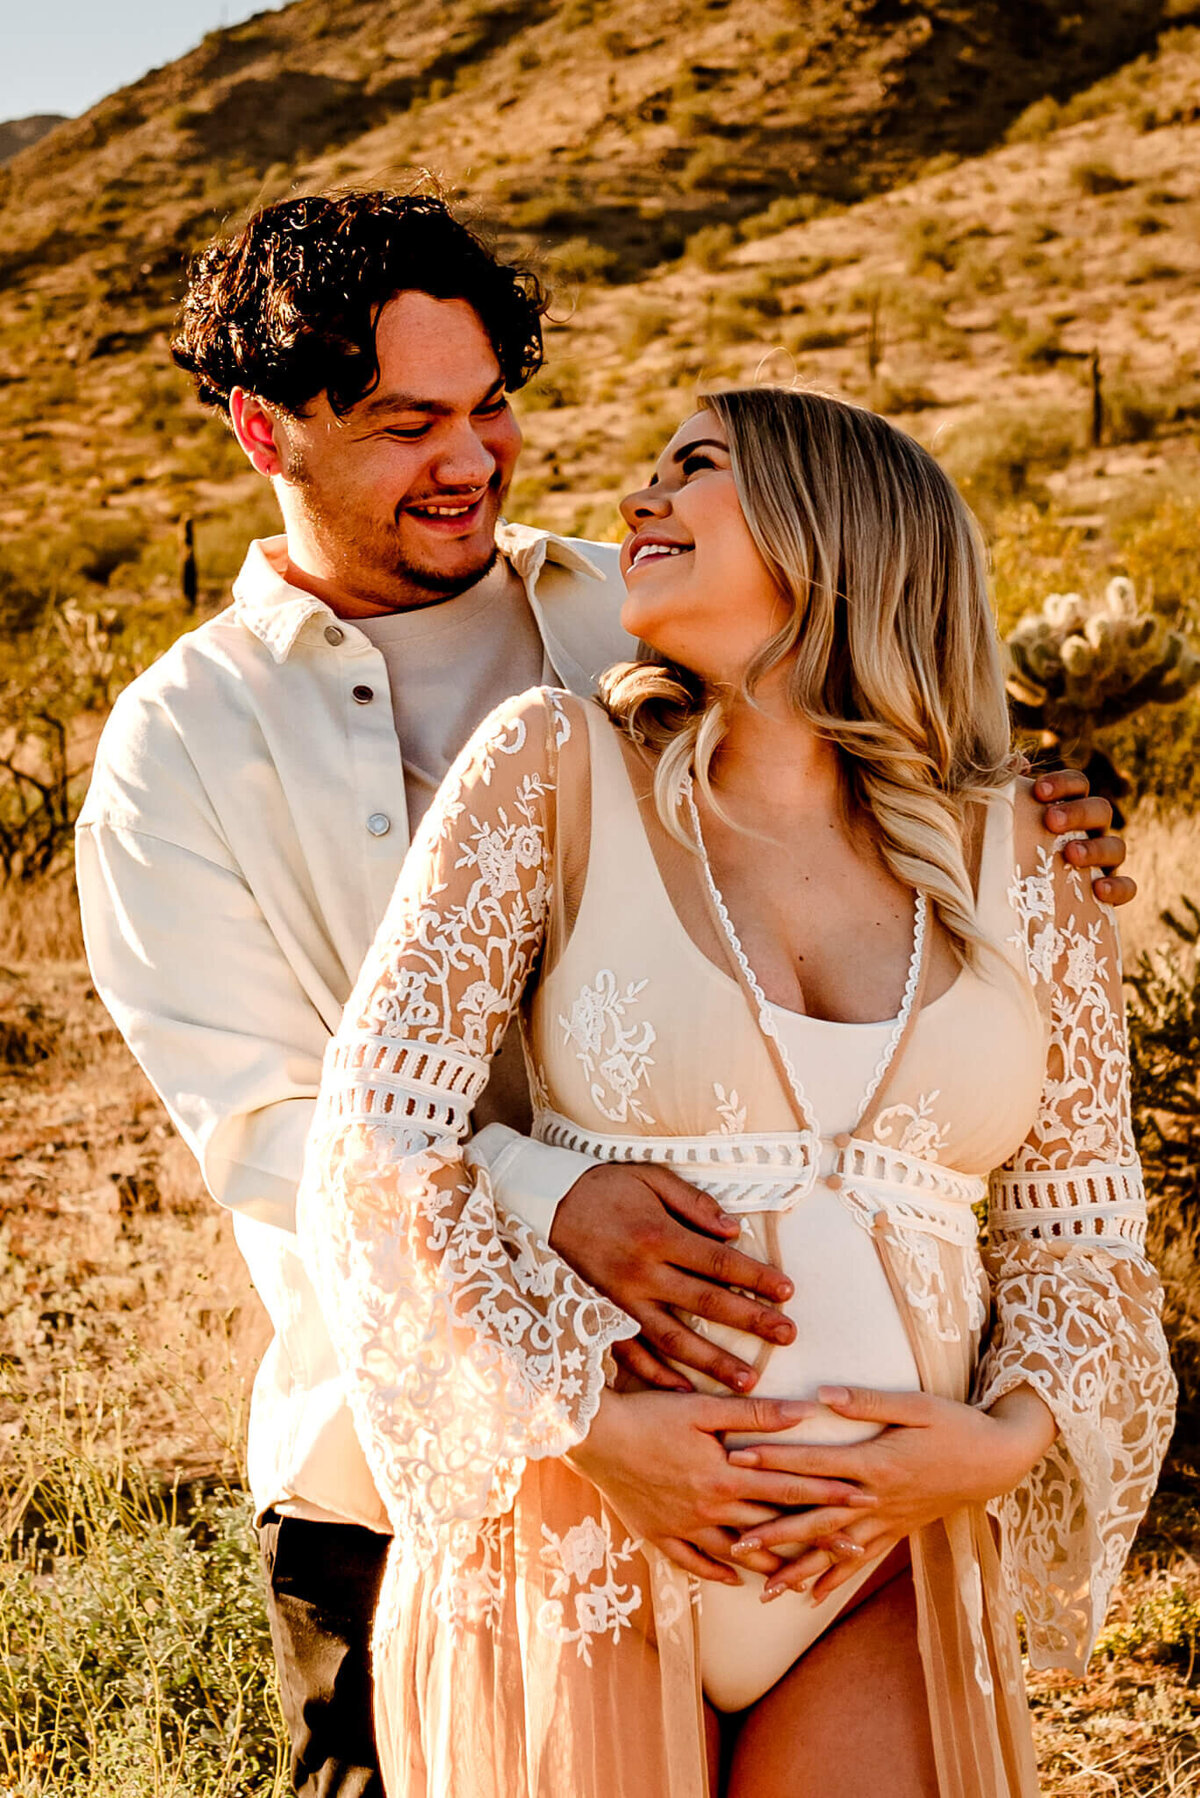 AZ parents smiling while holding maternity baby bump for photographer